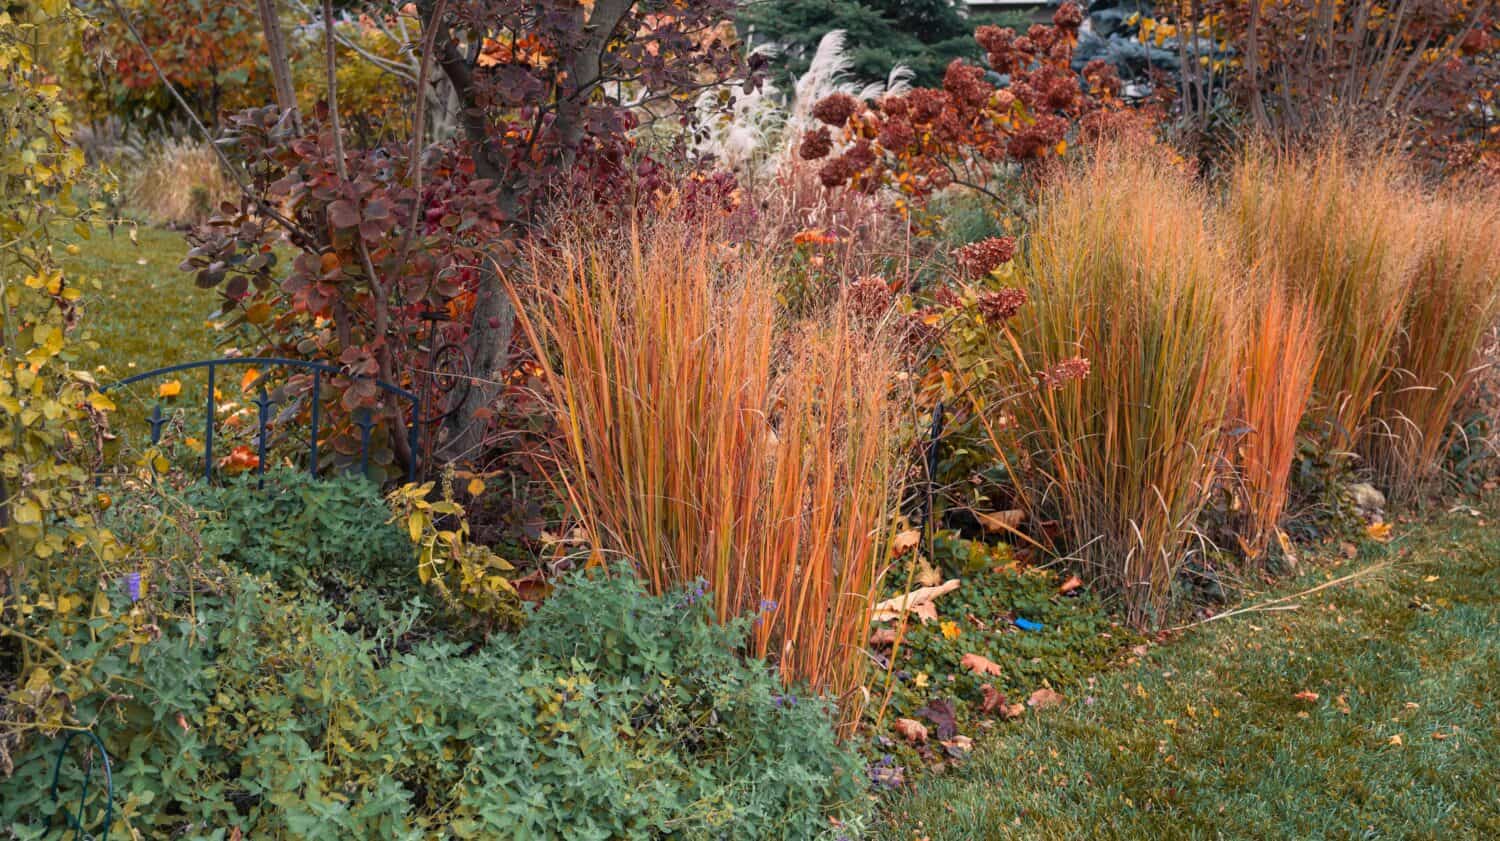 Four seasons native northwind grasses, panicum virgatum. provides a vertical privacy screen and architectural interest n this residential prairie garden.Keywords language: English